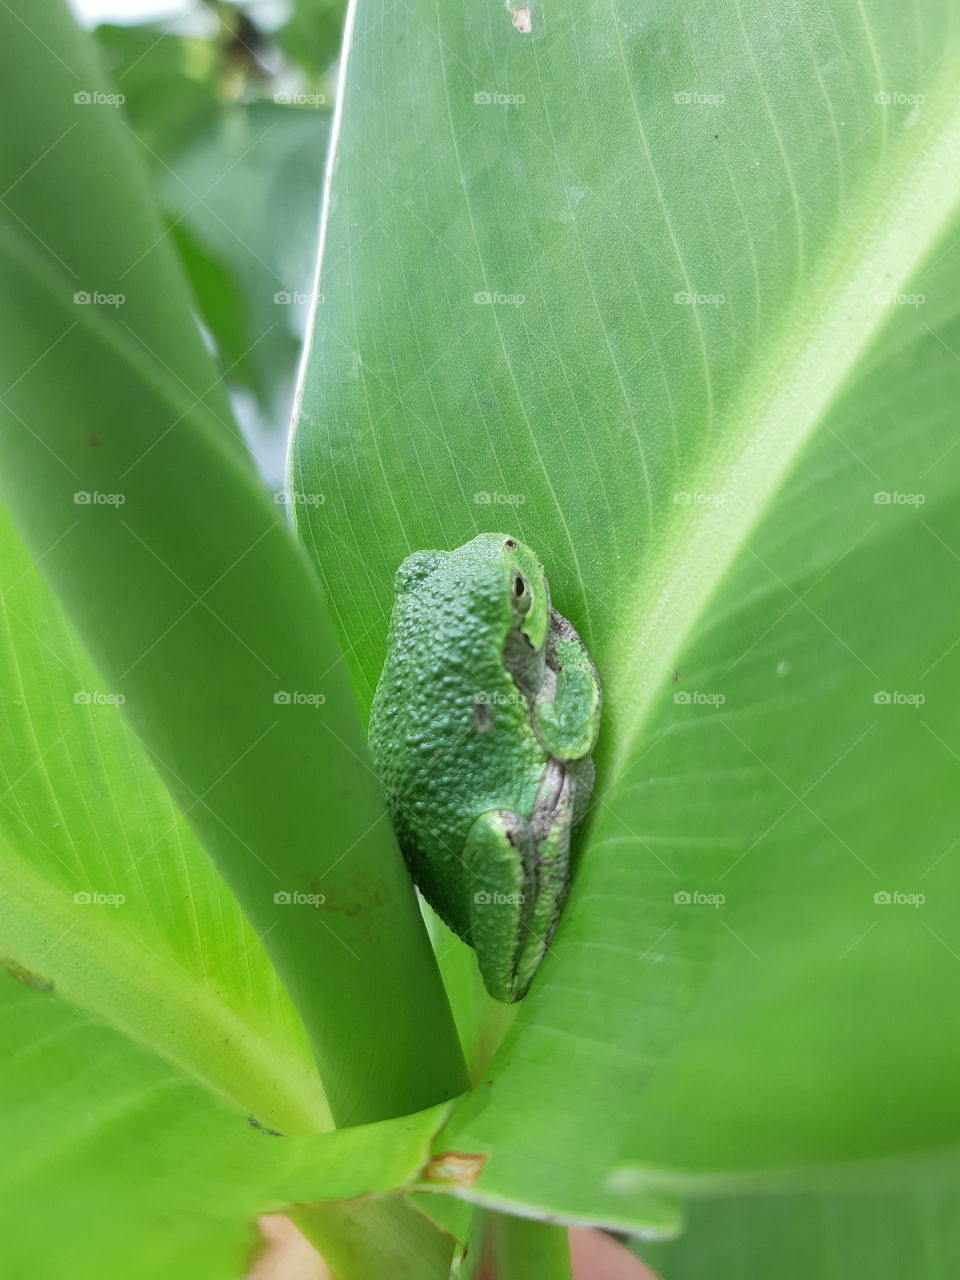 Tree frog on canna lilly